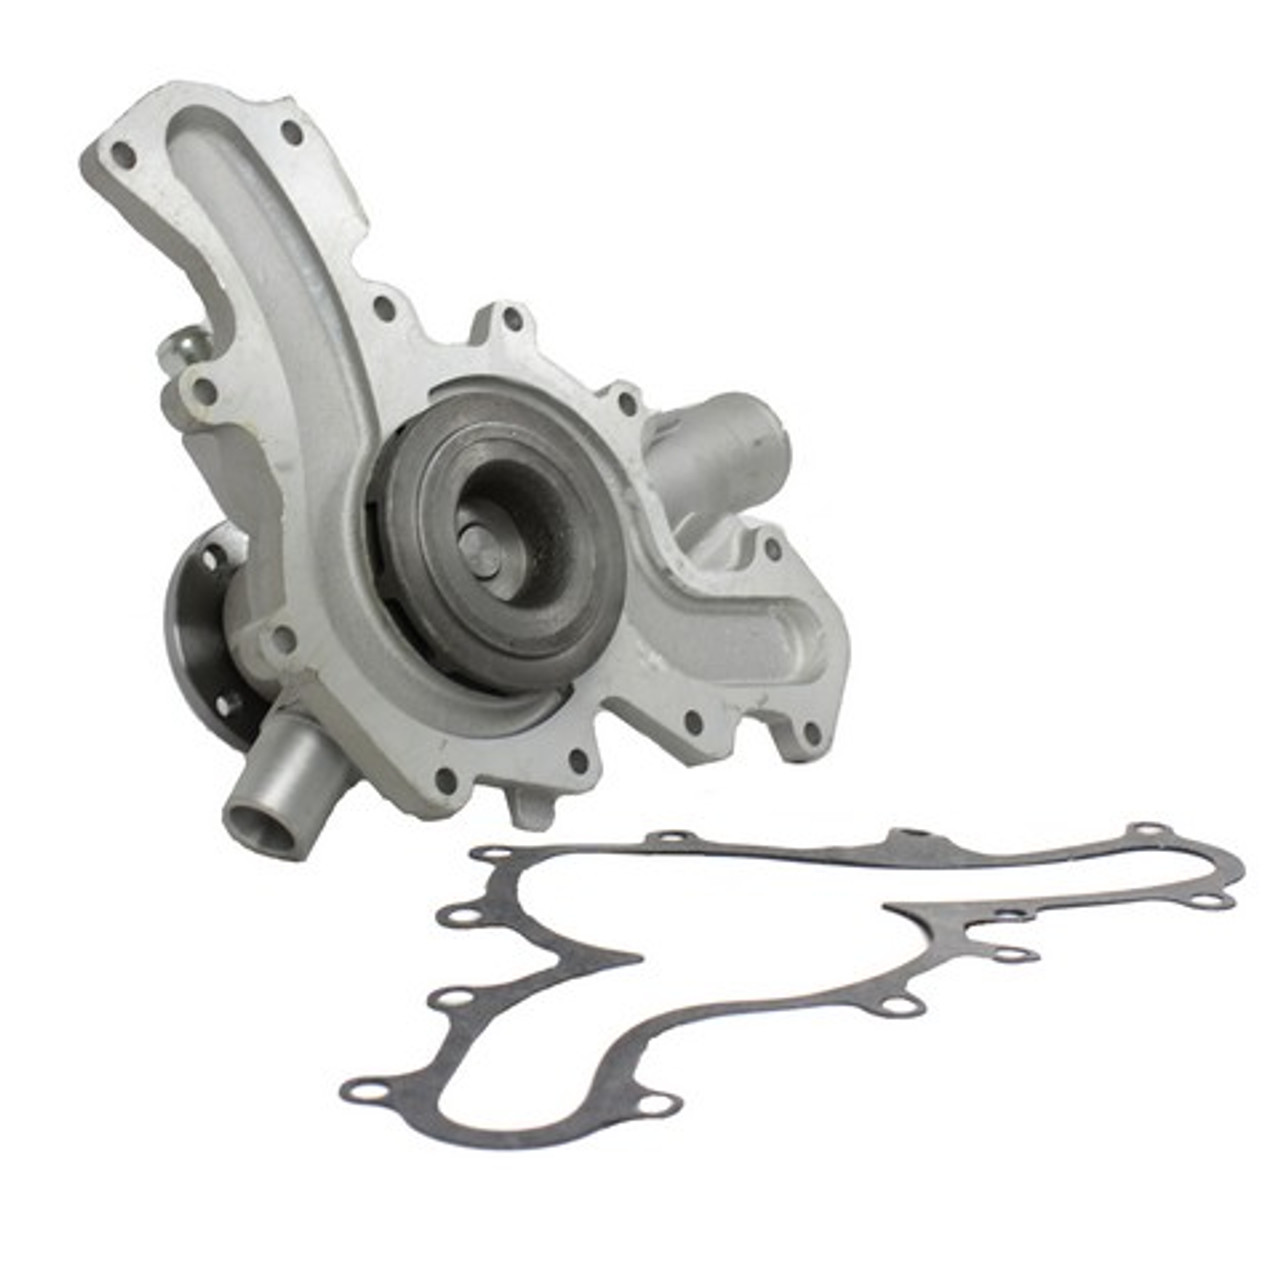 Water Pump 4.0L 2005 Ford Mustang - WP4028.23